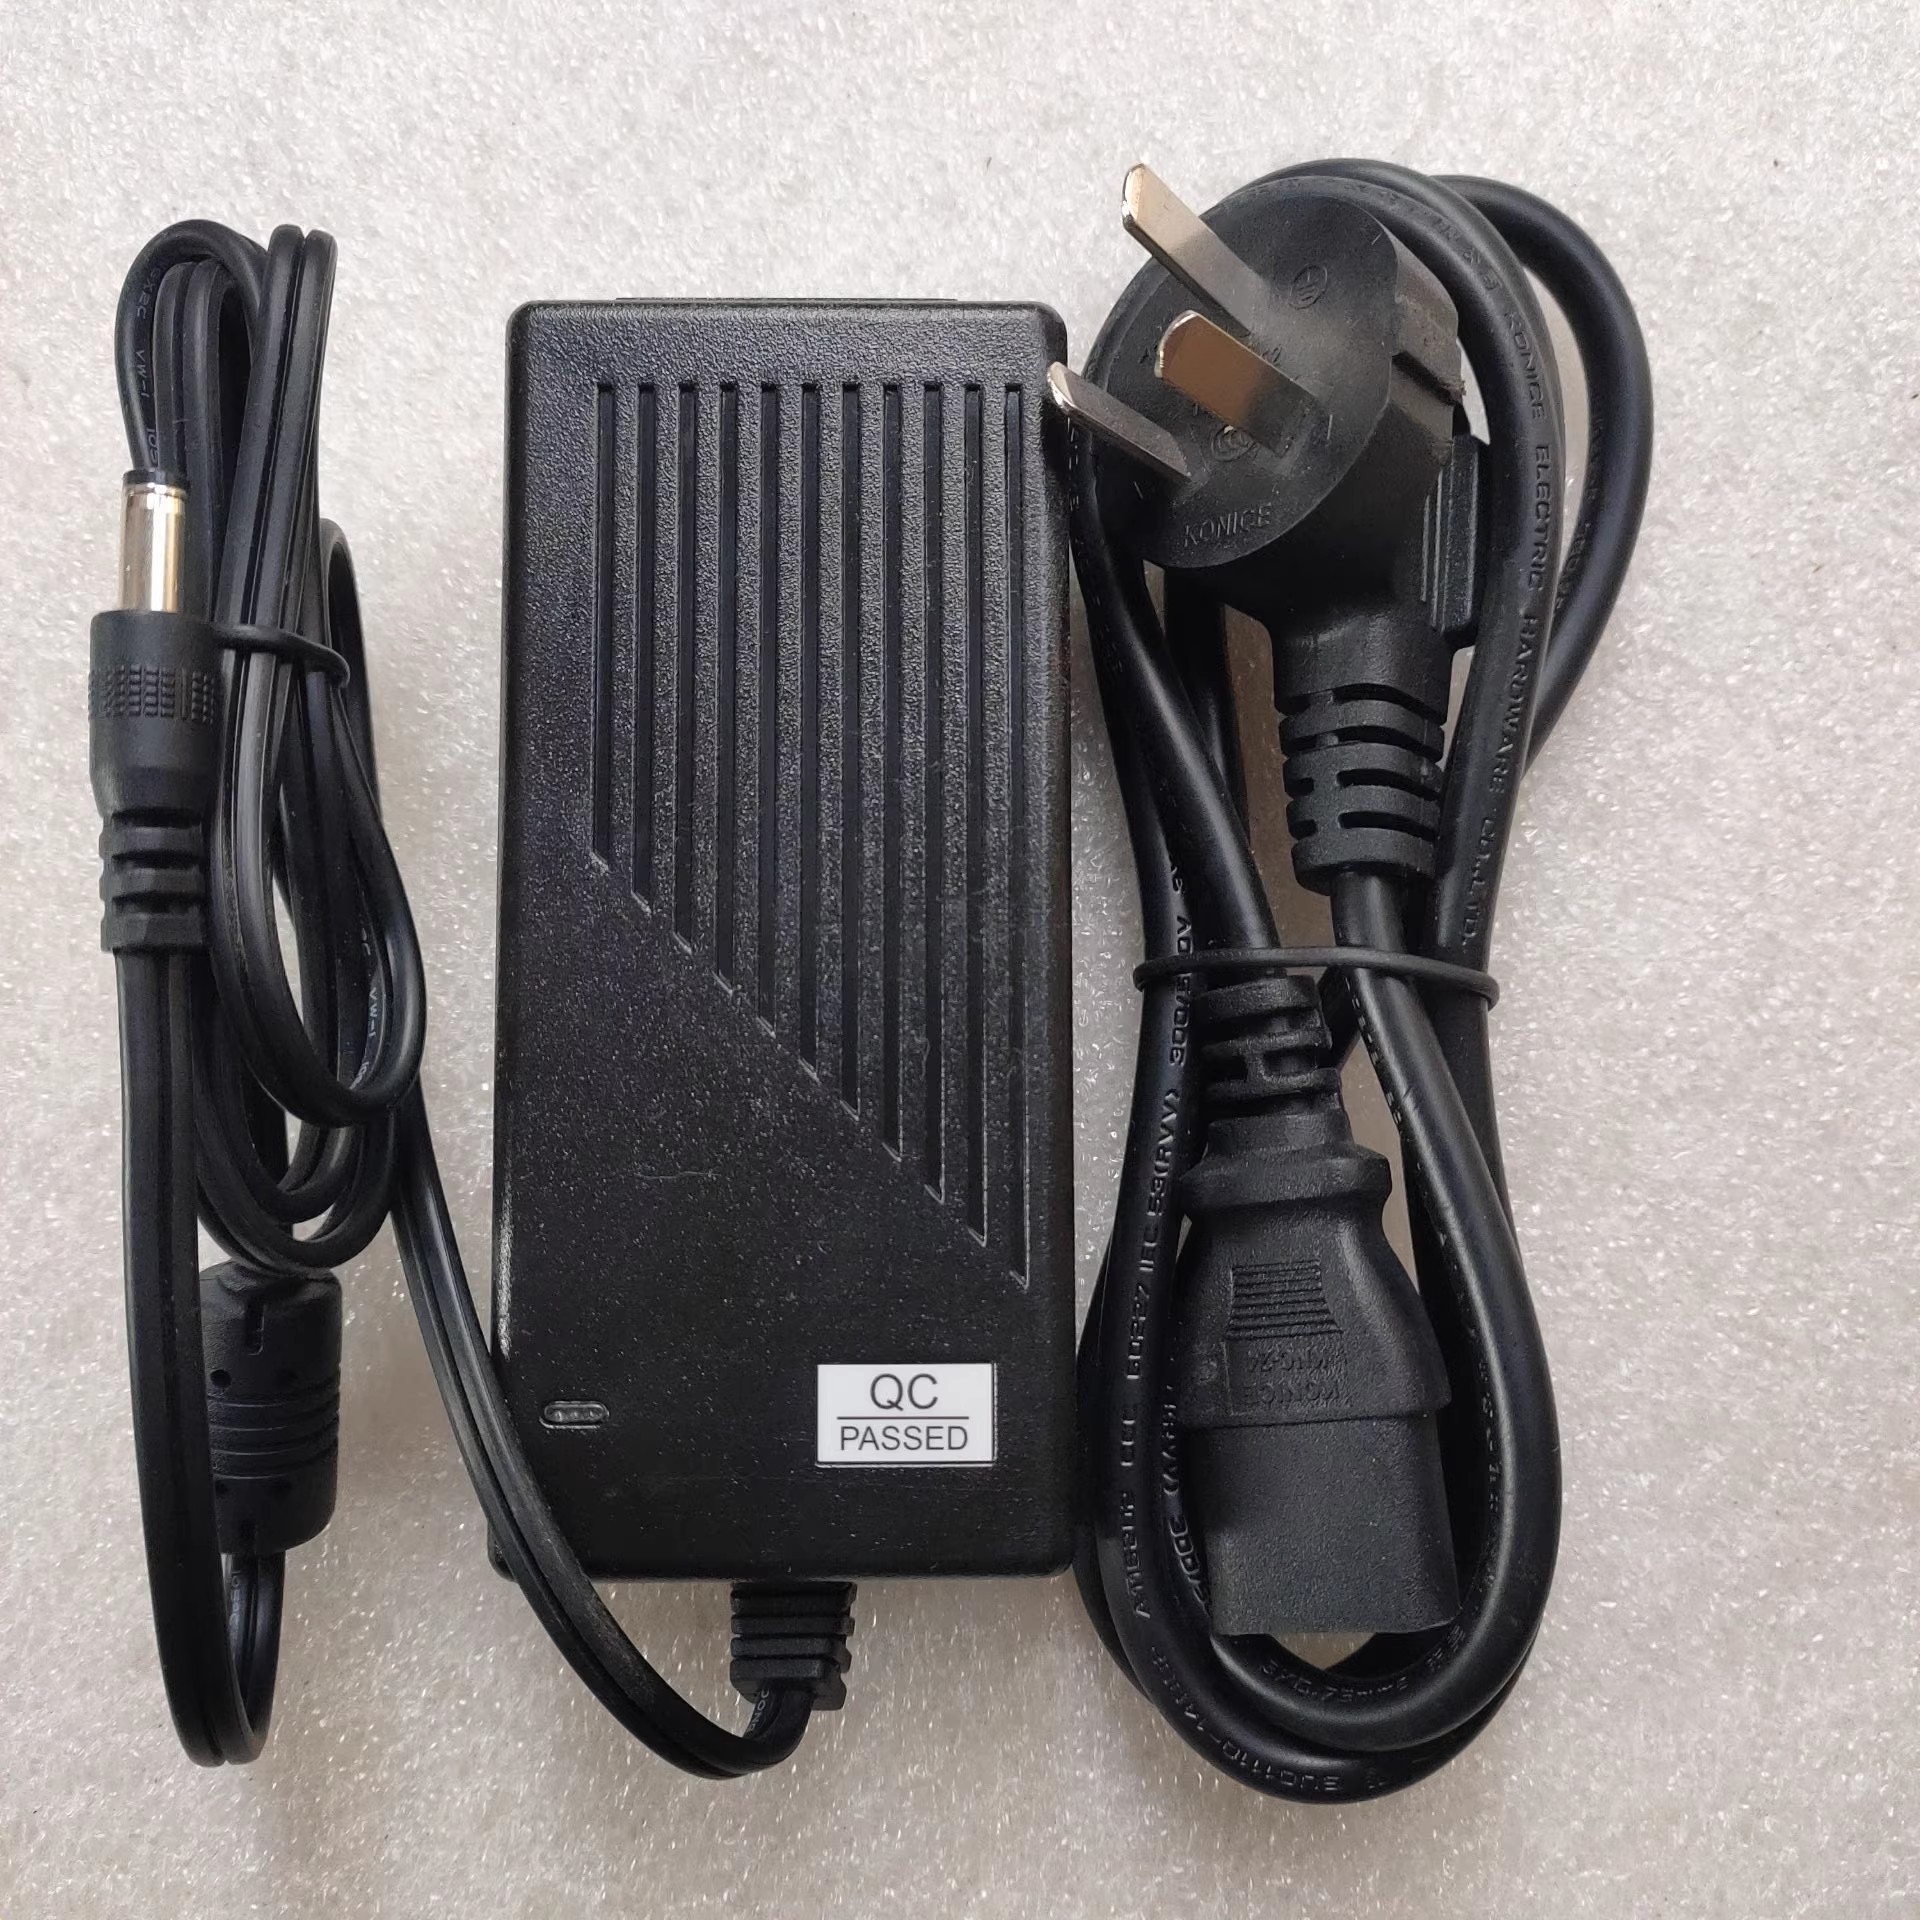 *Brand NEW*FAM COMPAMY 12V 4A AC DC ADAPTHE CP-1250 POWER Supply